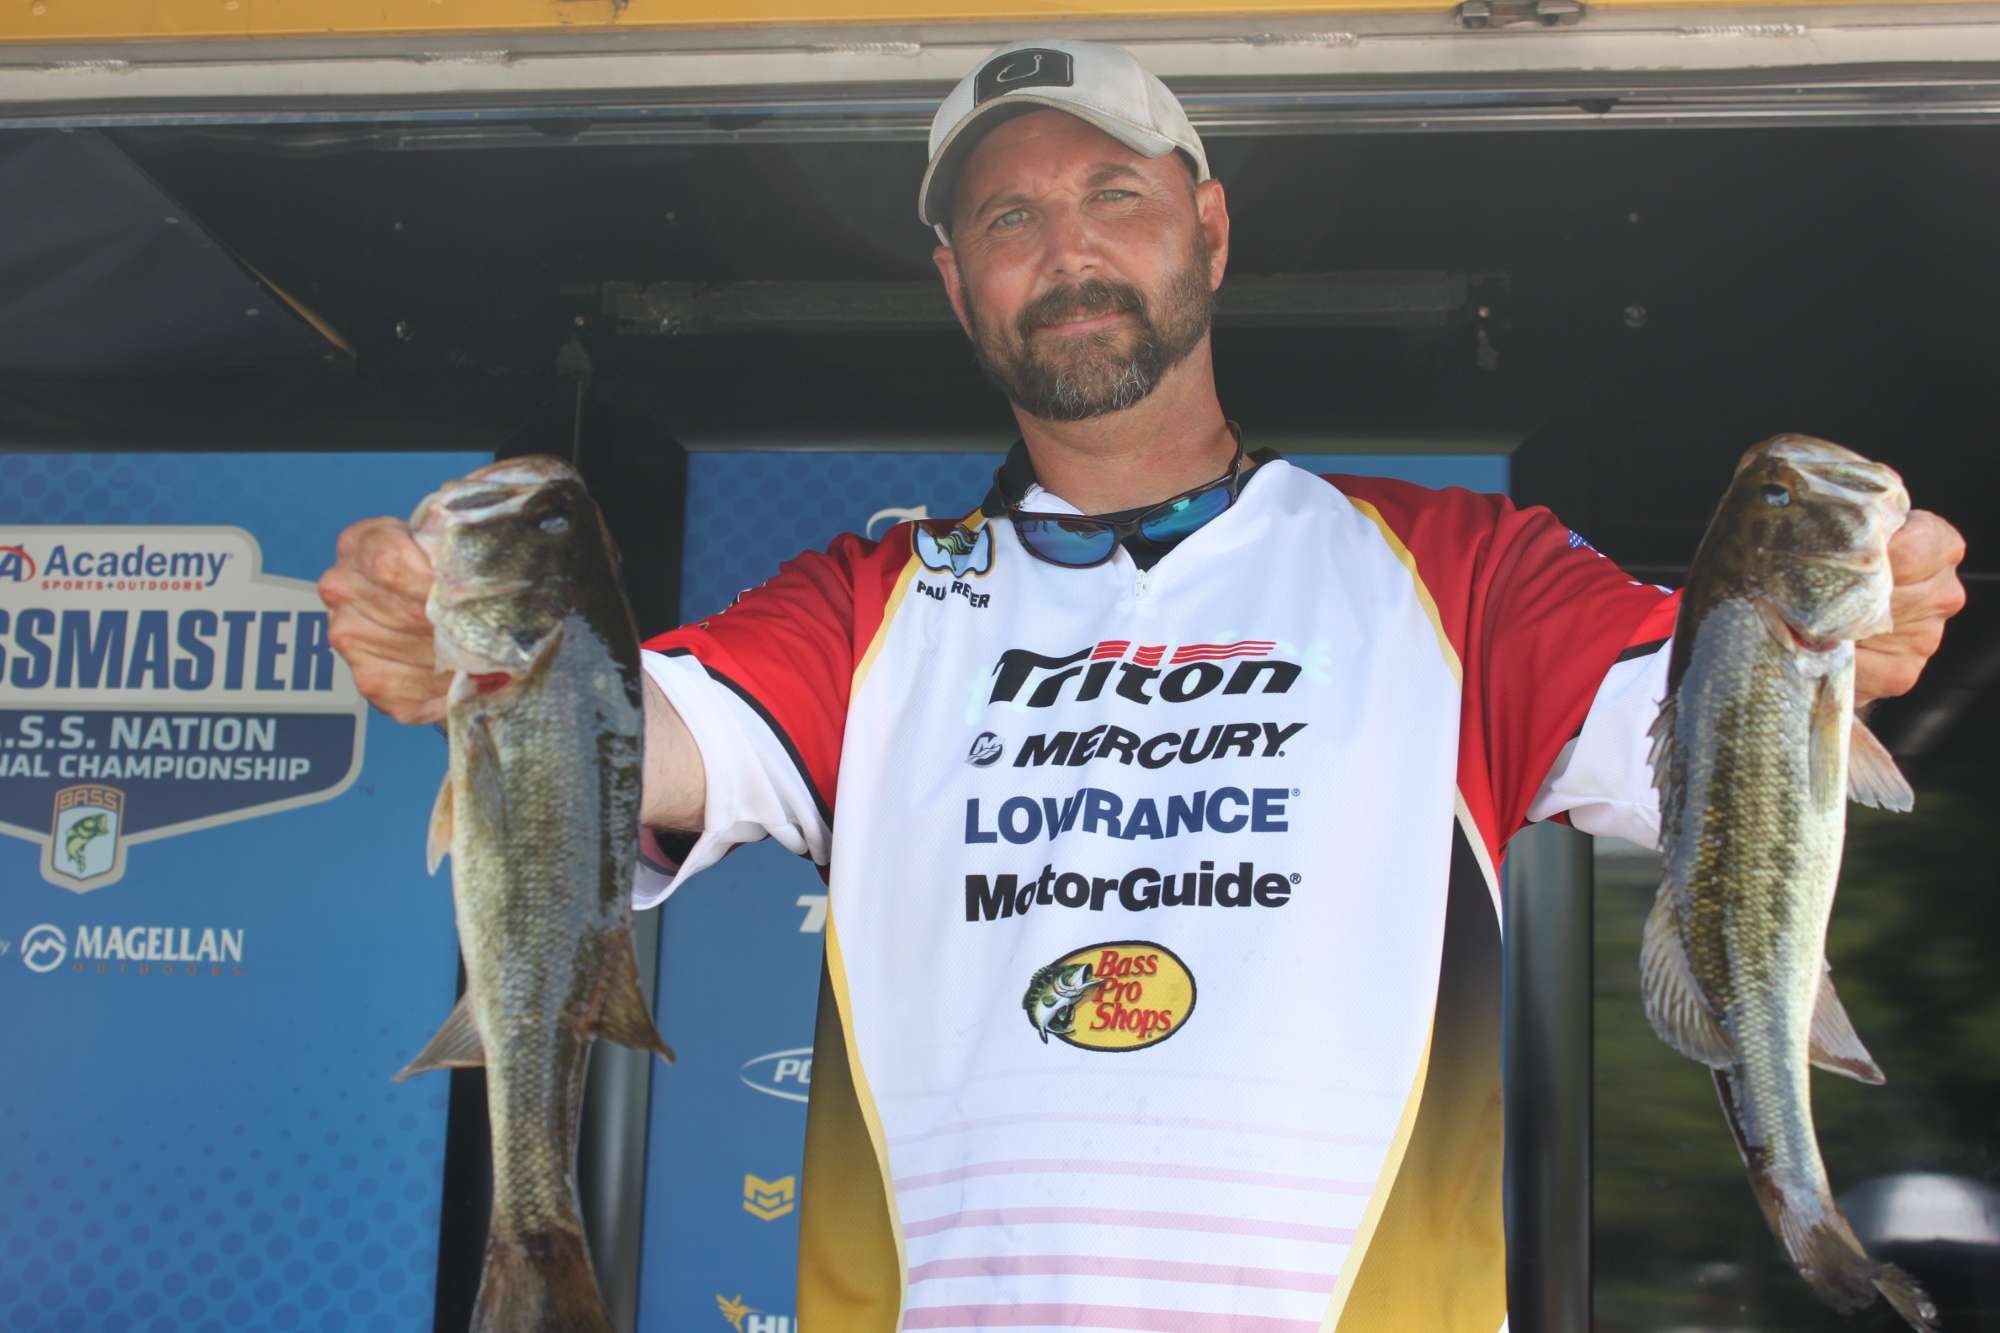 Paul Reter of Team Maryland is in 24th place among boaters with 10 bass weighing 14 pounds.